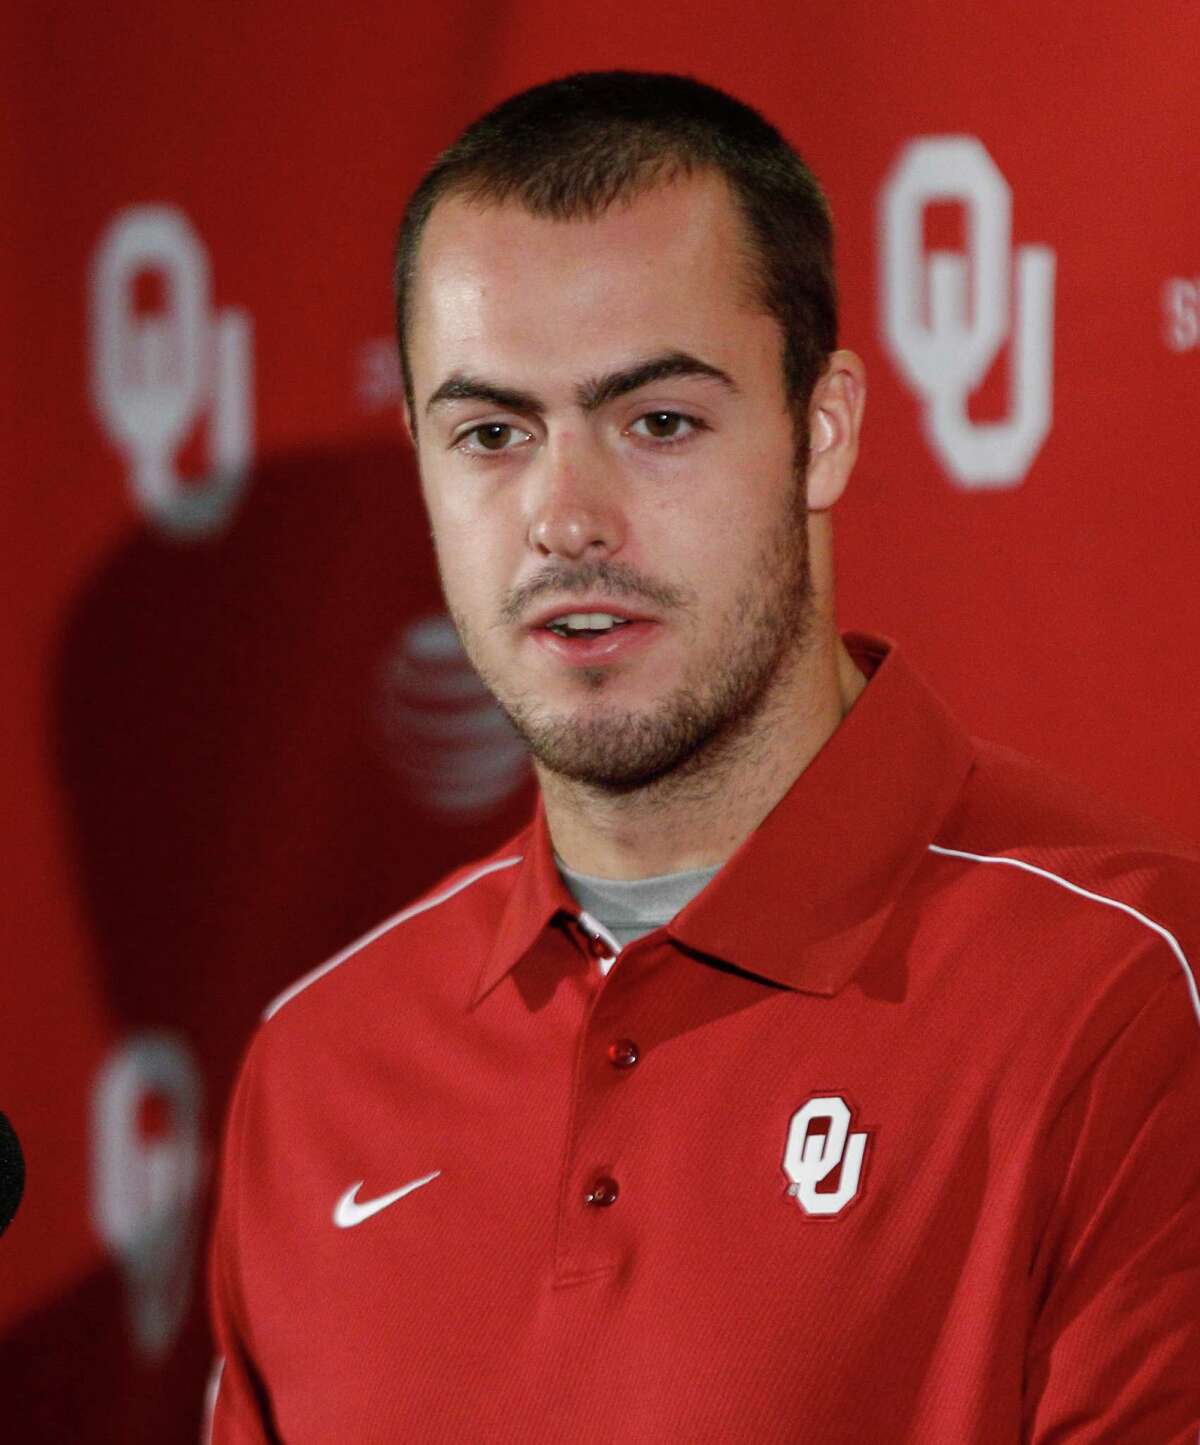 Oklahoma quarterback Landry Jones answers a question during a news conference in Norman, Okla., Monday, Oct. 8, 2012.